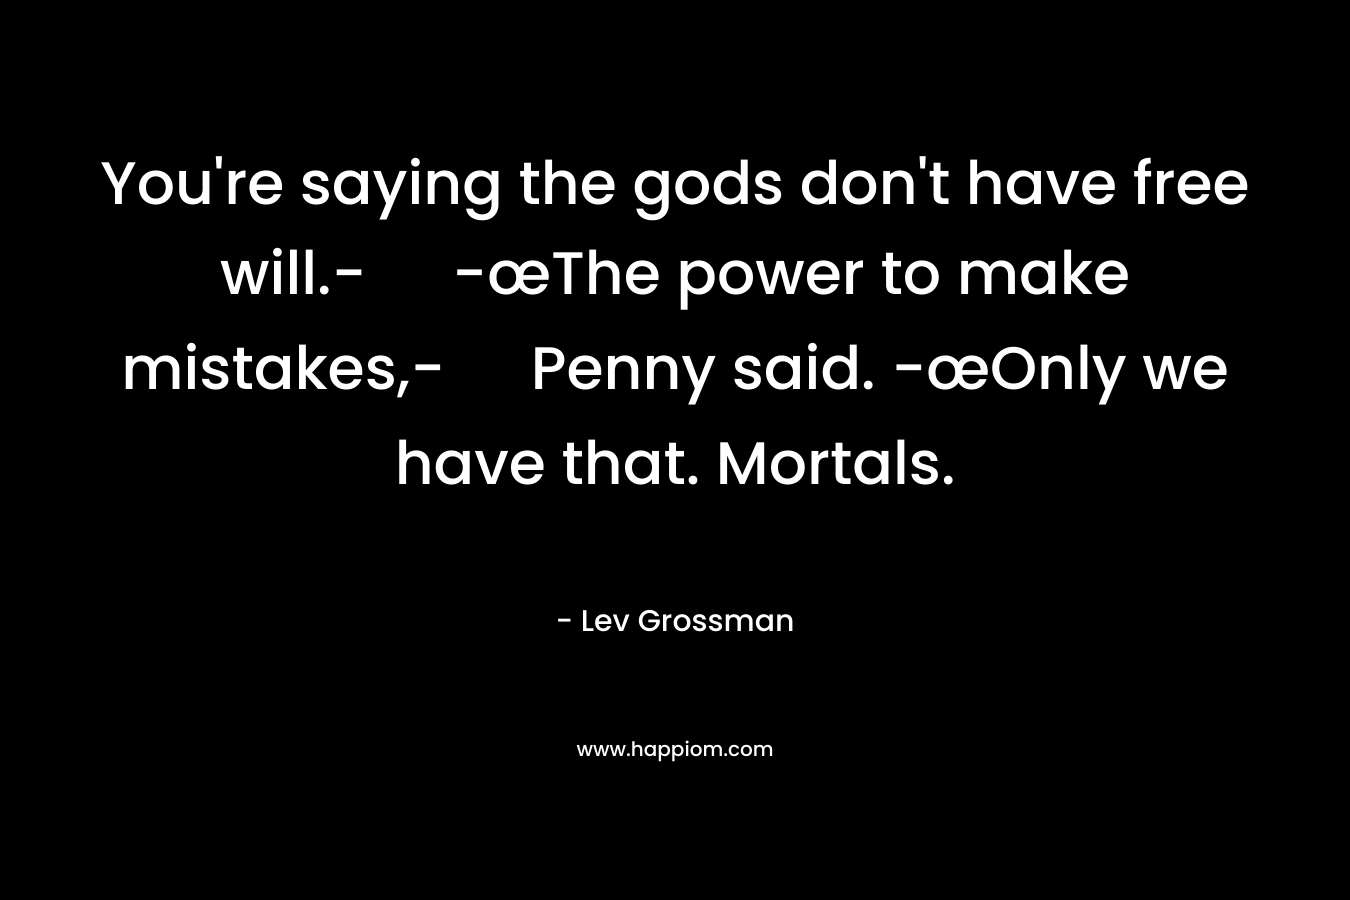 You’re saying the gods don’t have free will.- -œThe power to make mistakes,- Penny said. -œOnly we have that. Mortals. – Lev Grossman